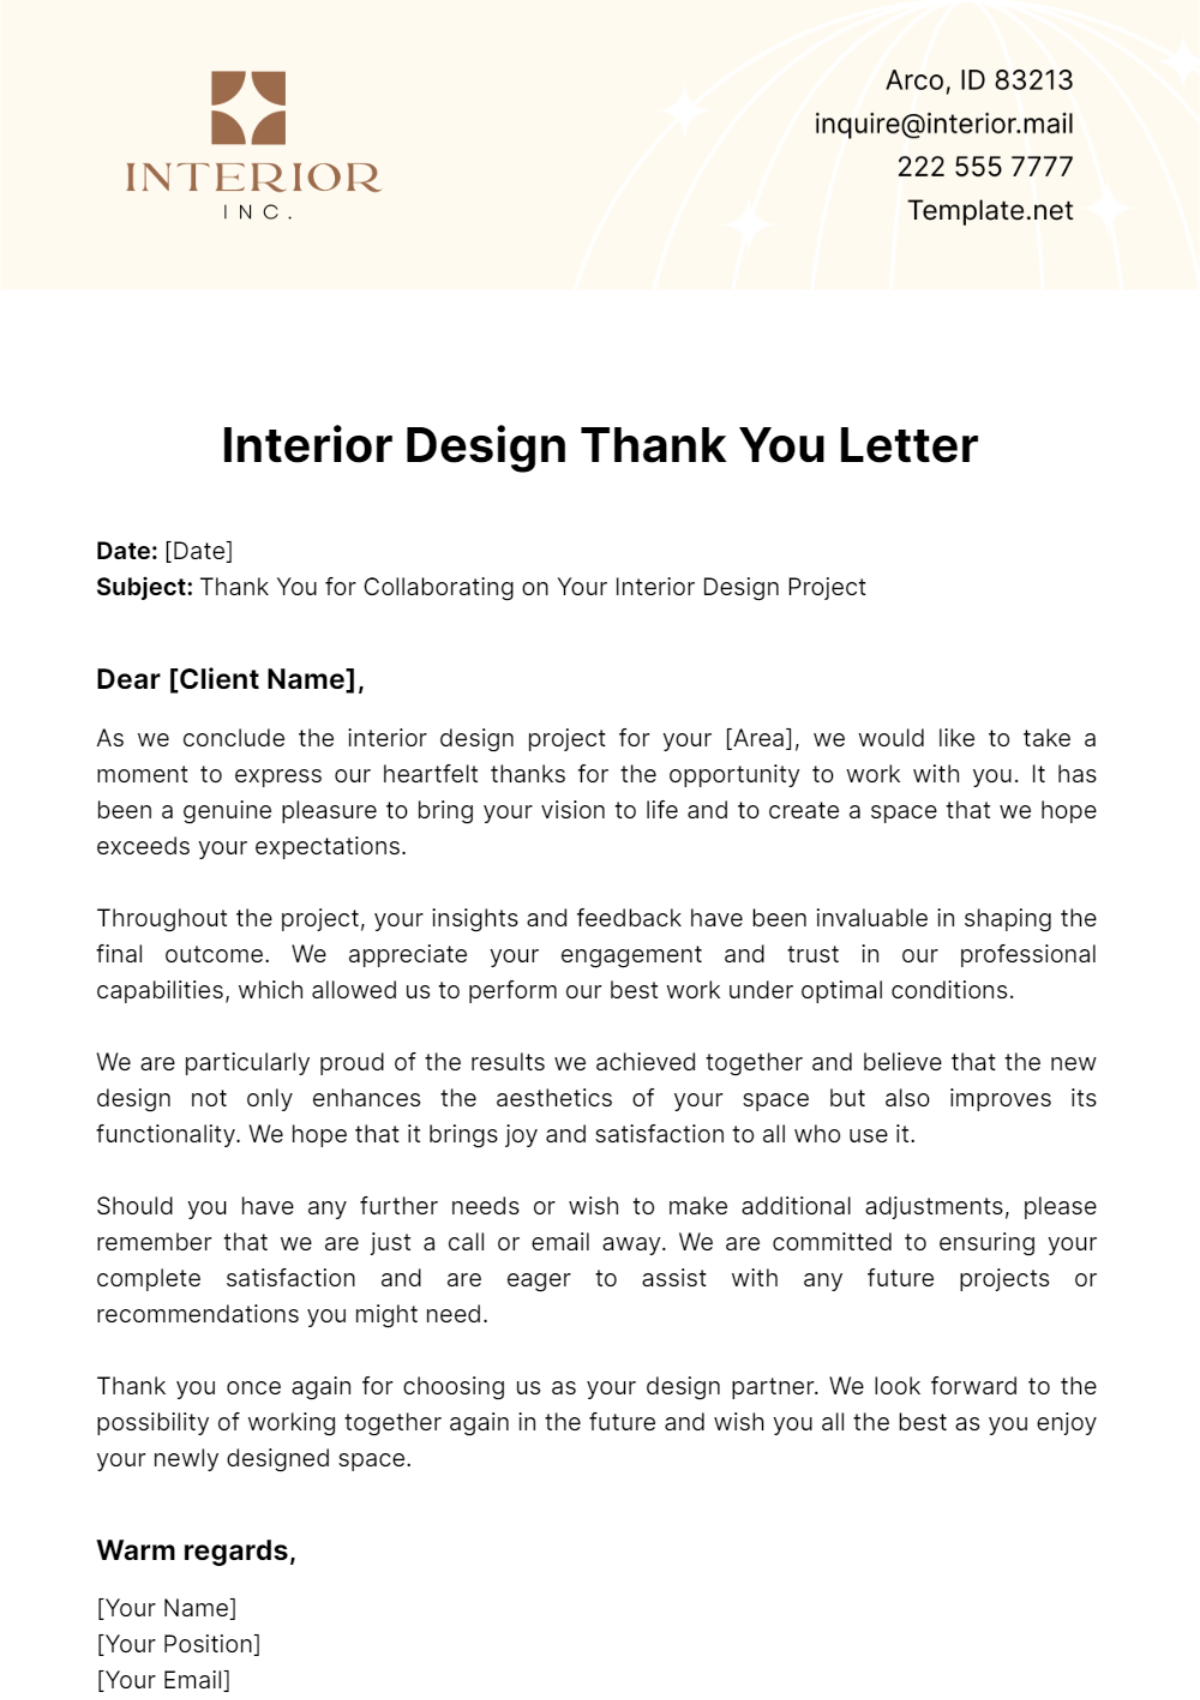 Interior Design Thank You Letter Template